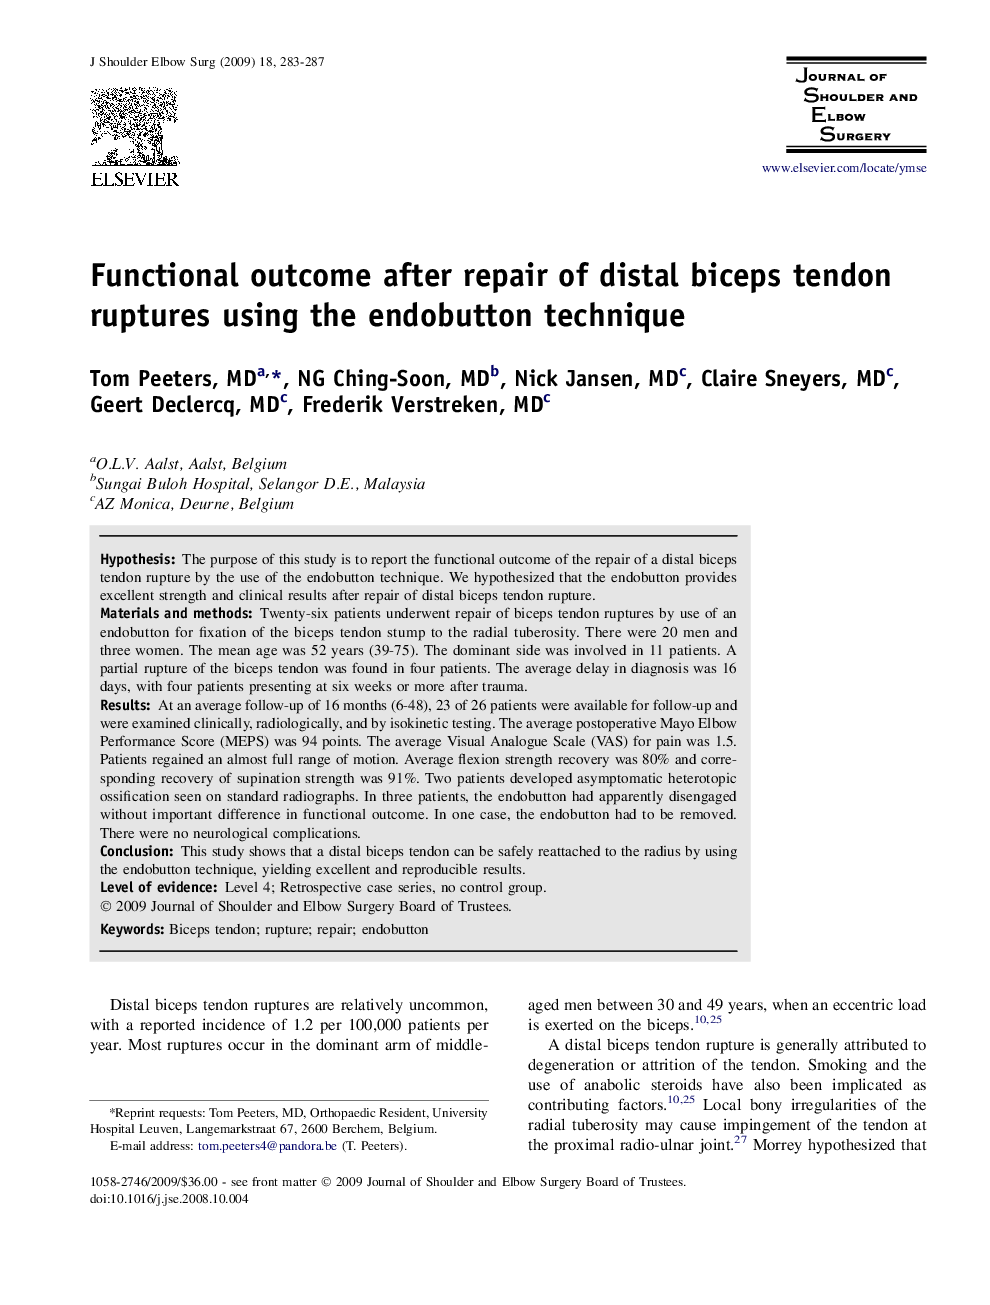 Functional outcome after repair of distal biceps tendon ruptures using the endobutton technique